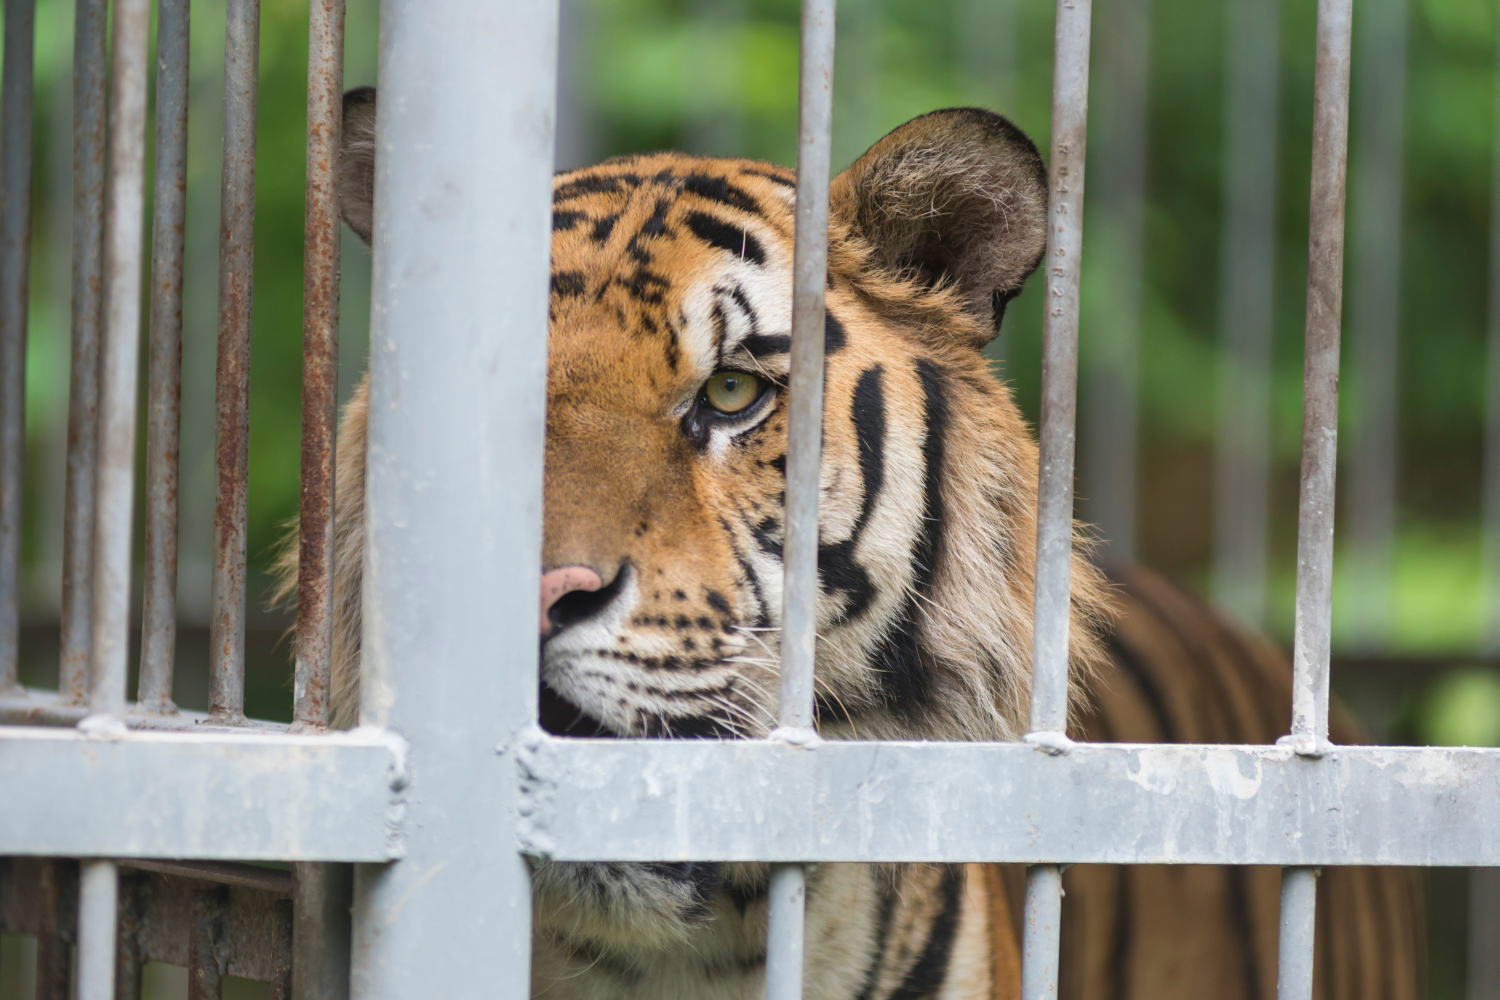 A tiger looks out from behind metal bars of an enclosure. 